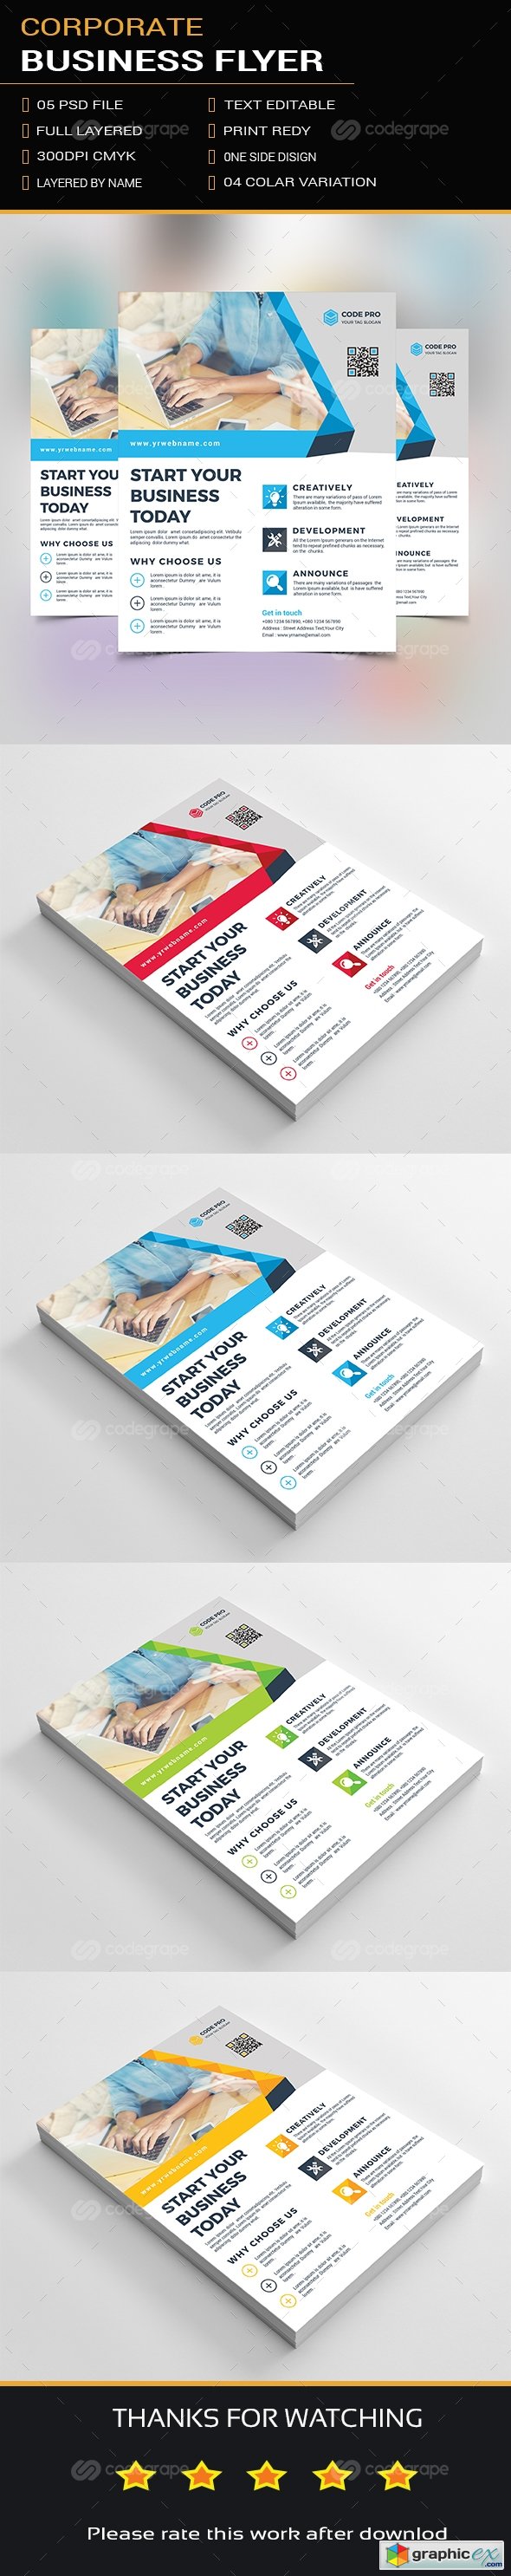 Corporate Business Flyer 10053